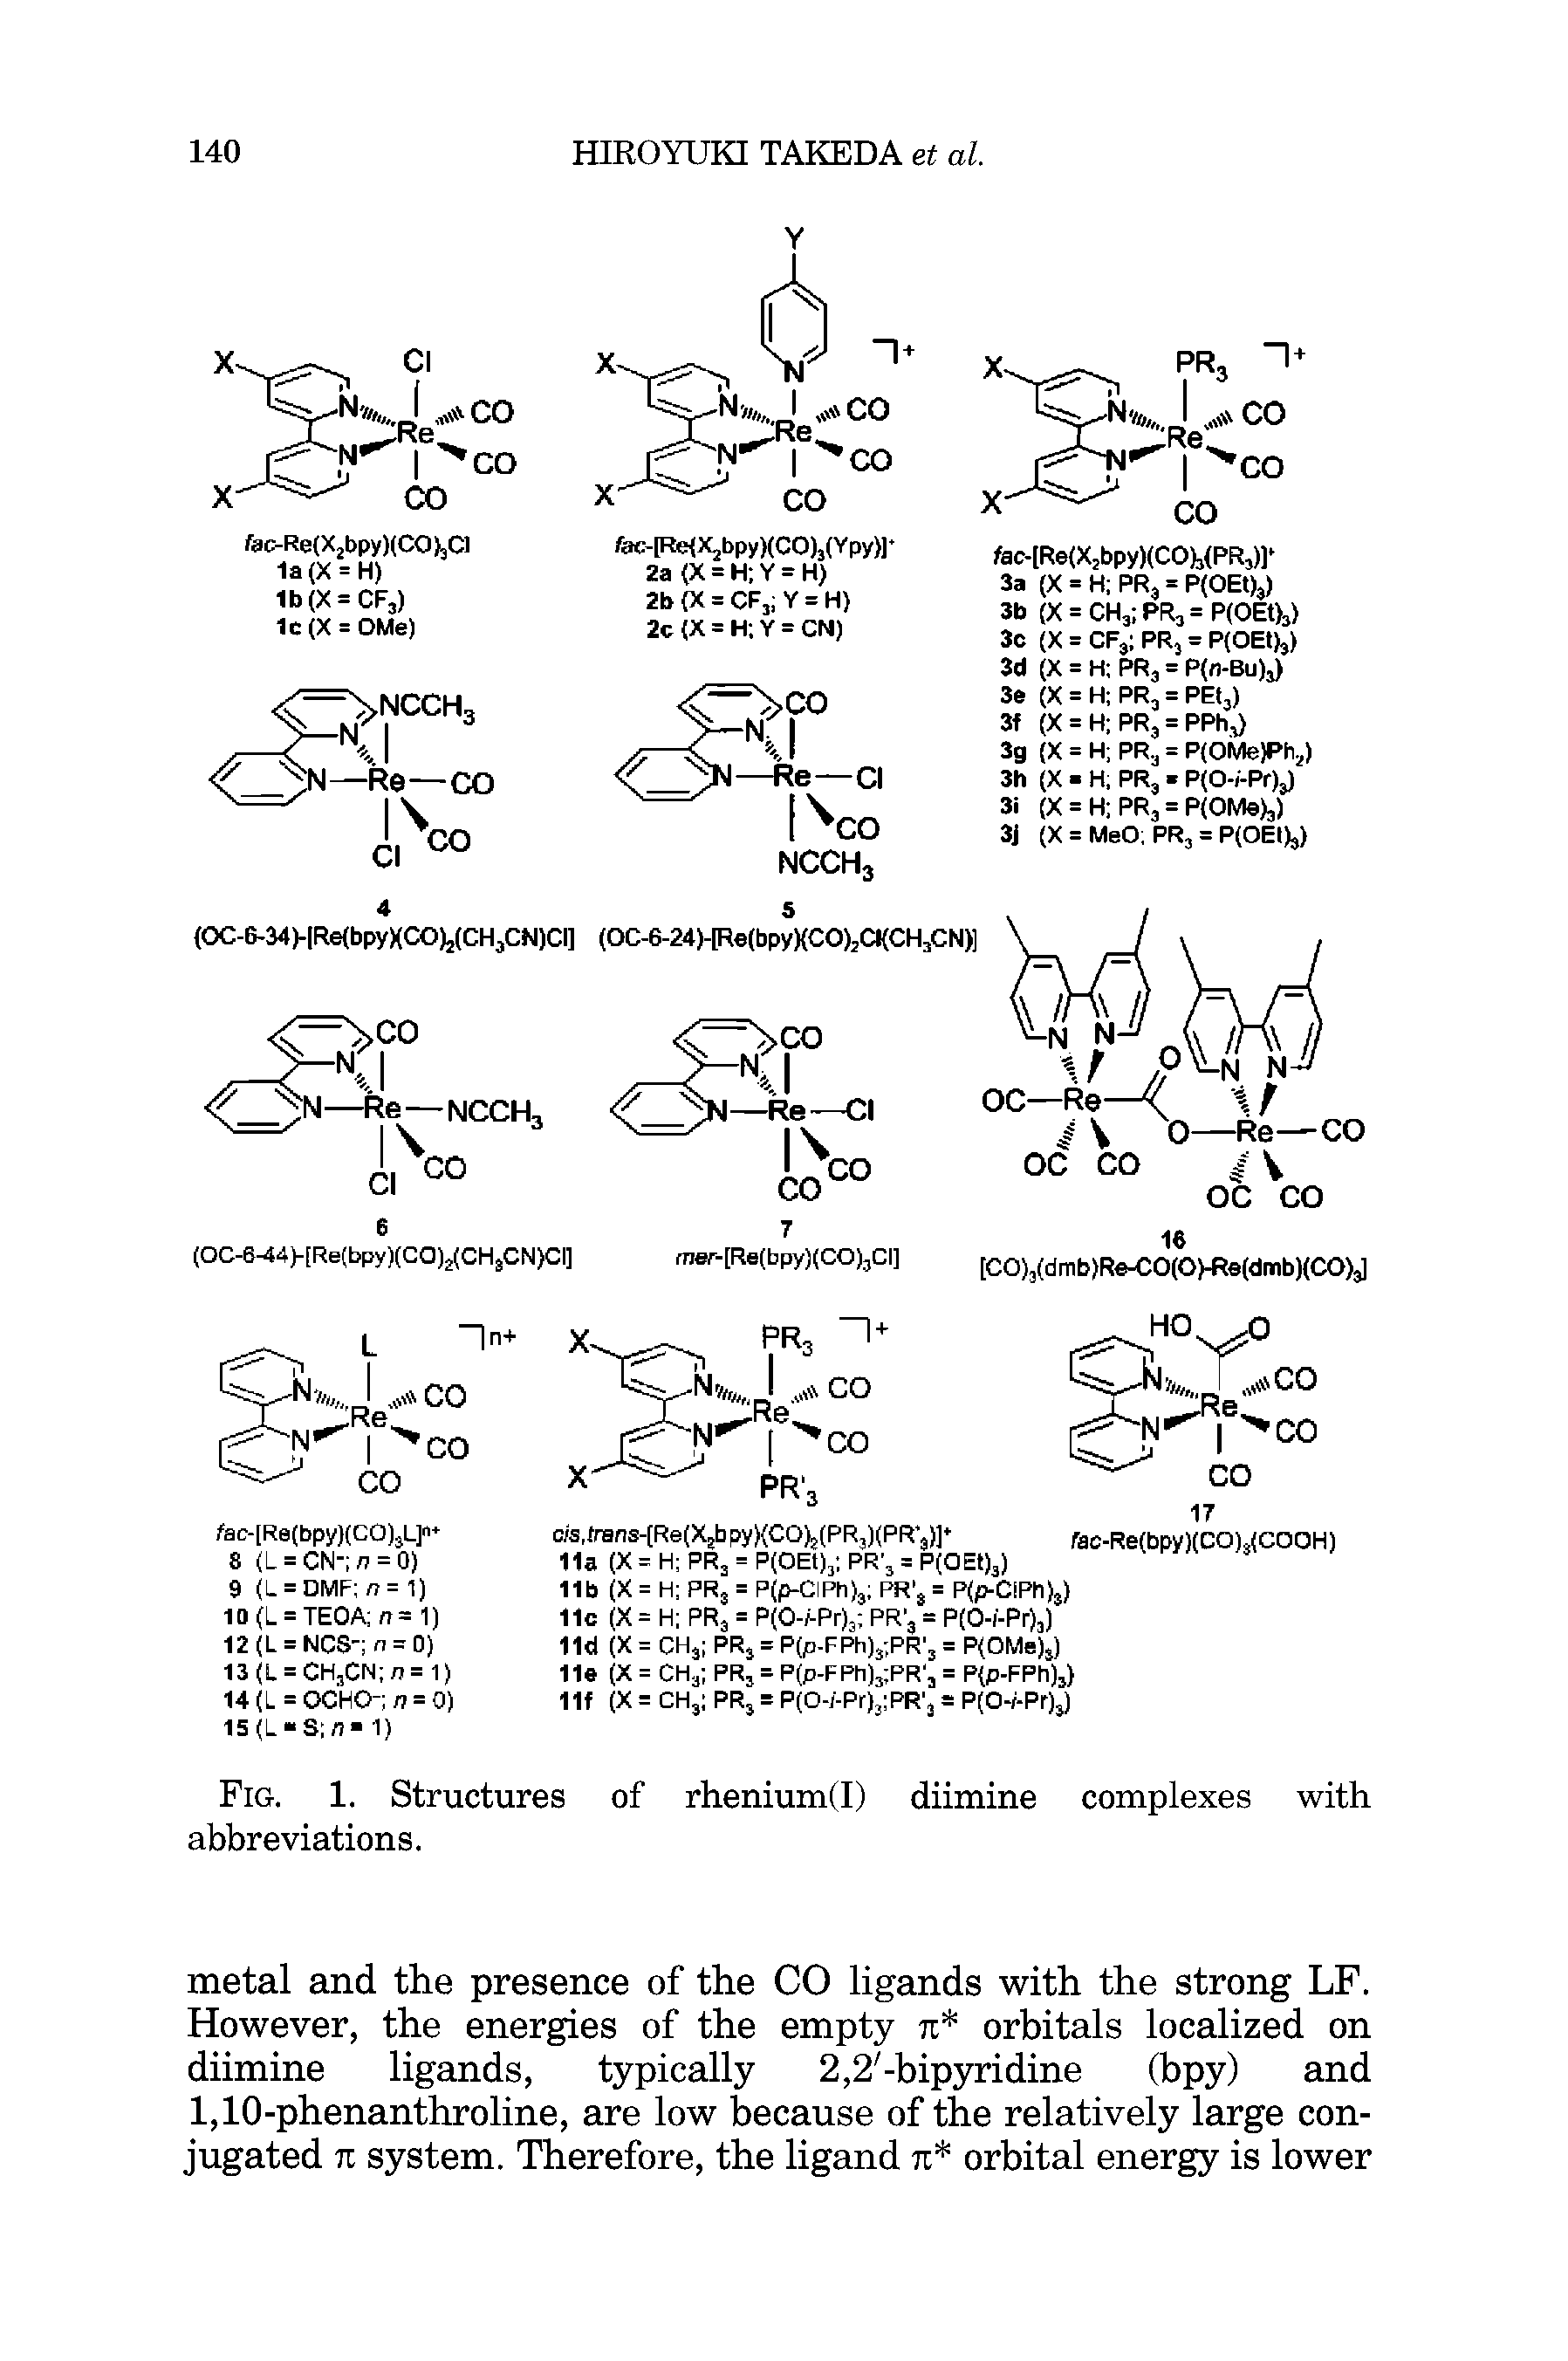 Fig. 1. Structures of rhenium(I) diimine complexes with abbreviations.